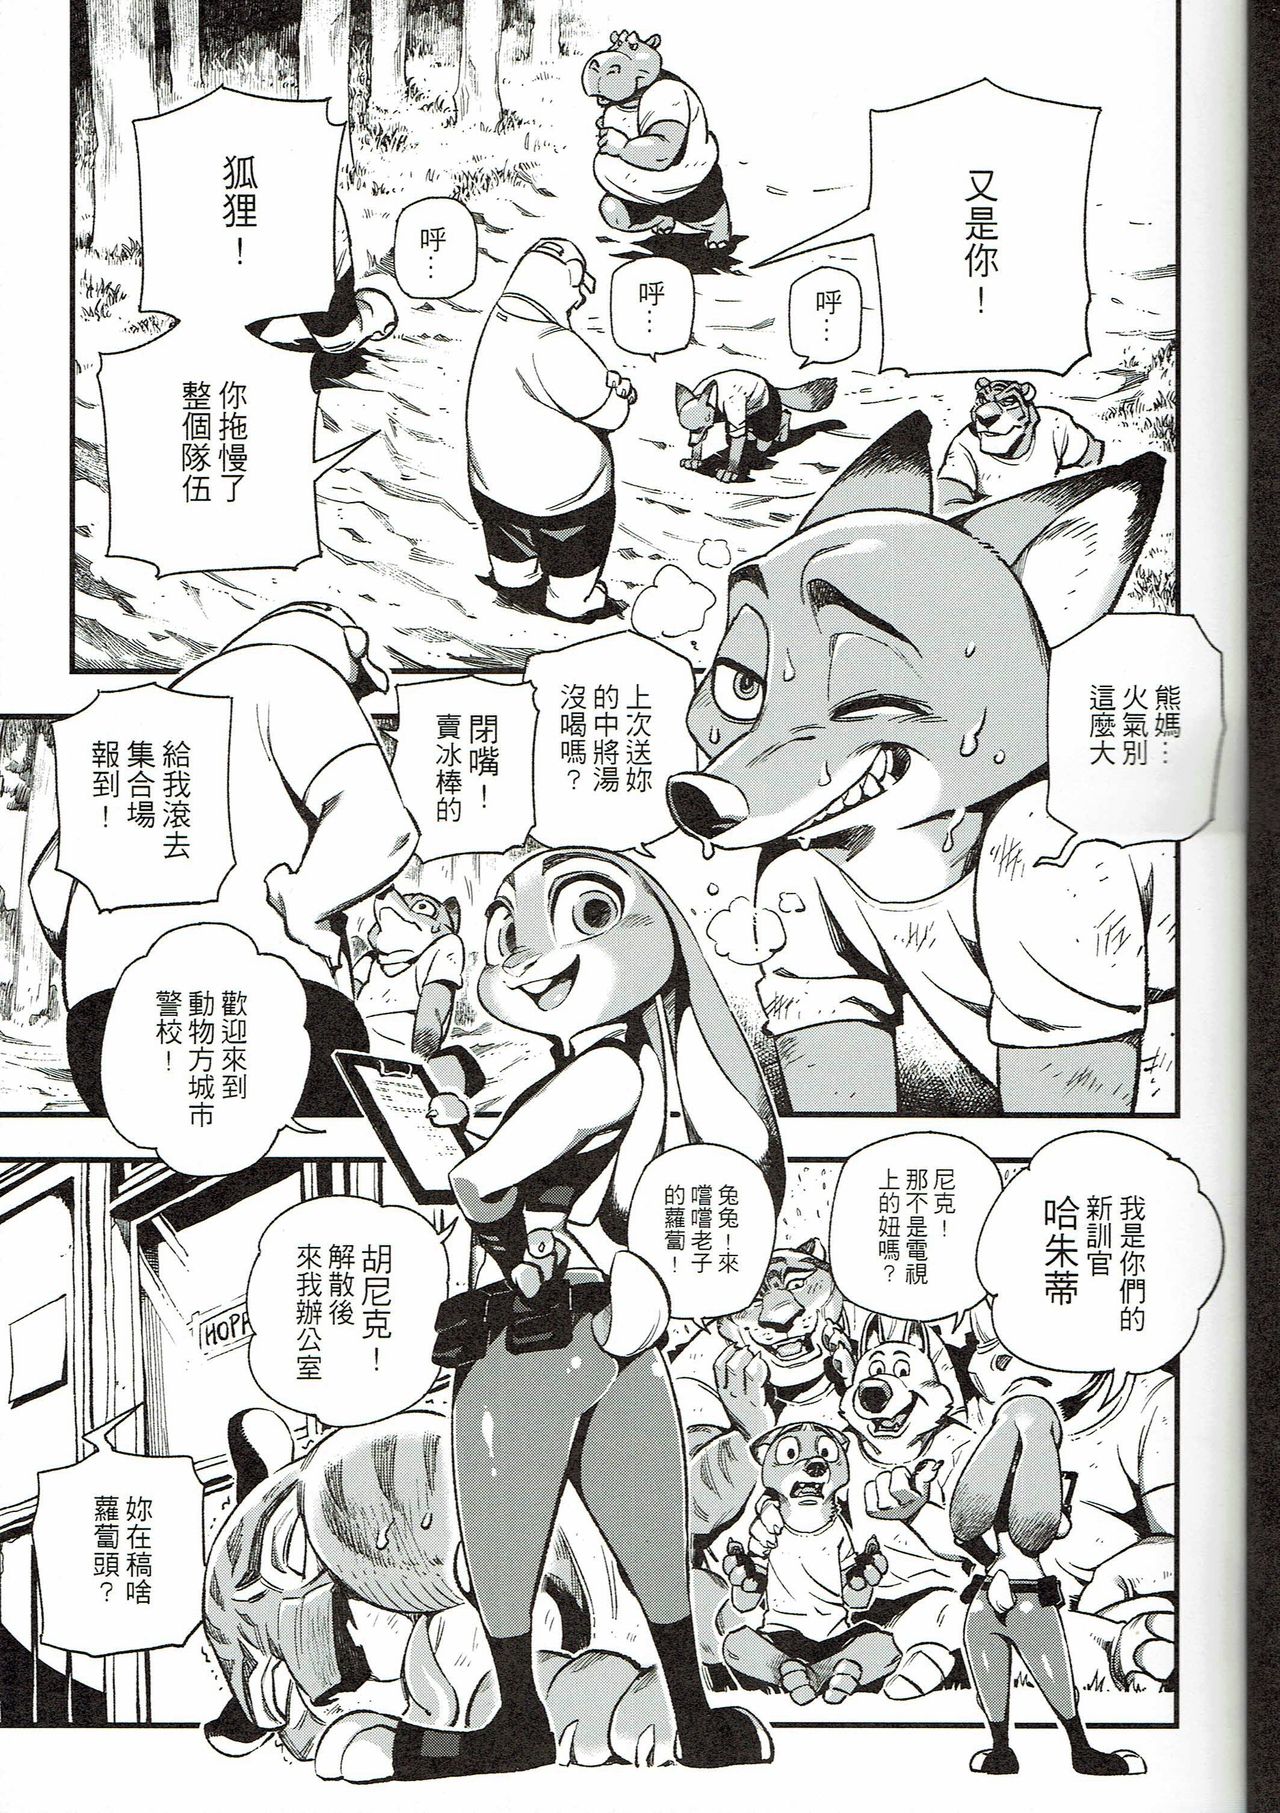 What Does The Fox Say? (FF28) [熊掌社 (俺正讀)] 狐狸怎麼叫? (ズートピア) [中国語]